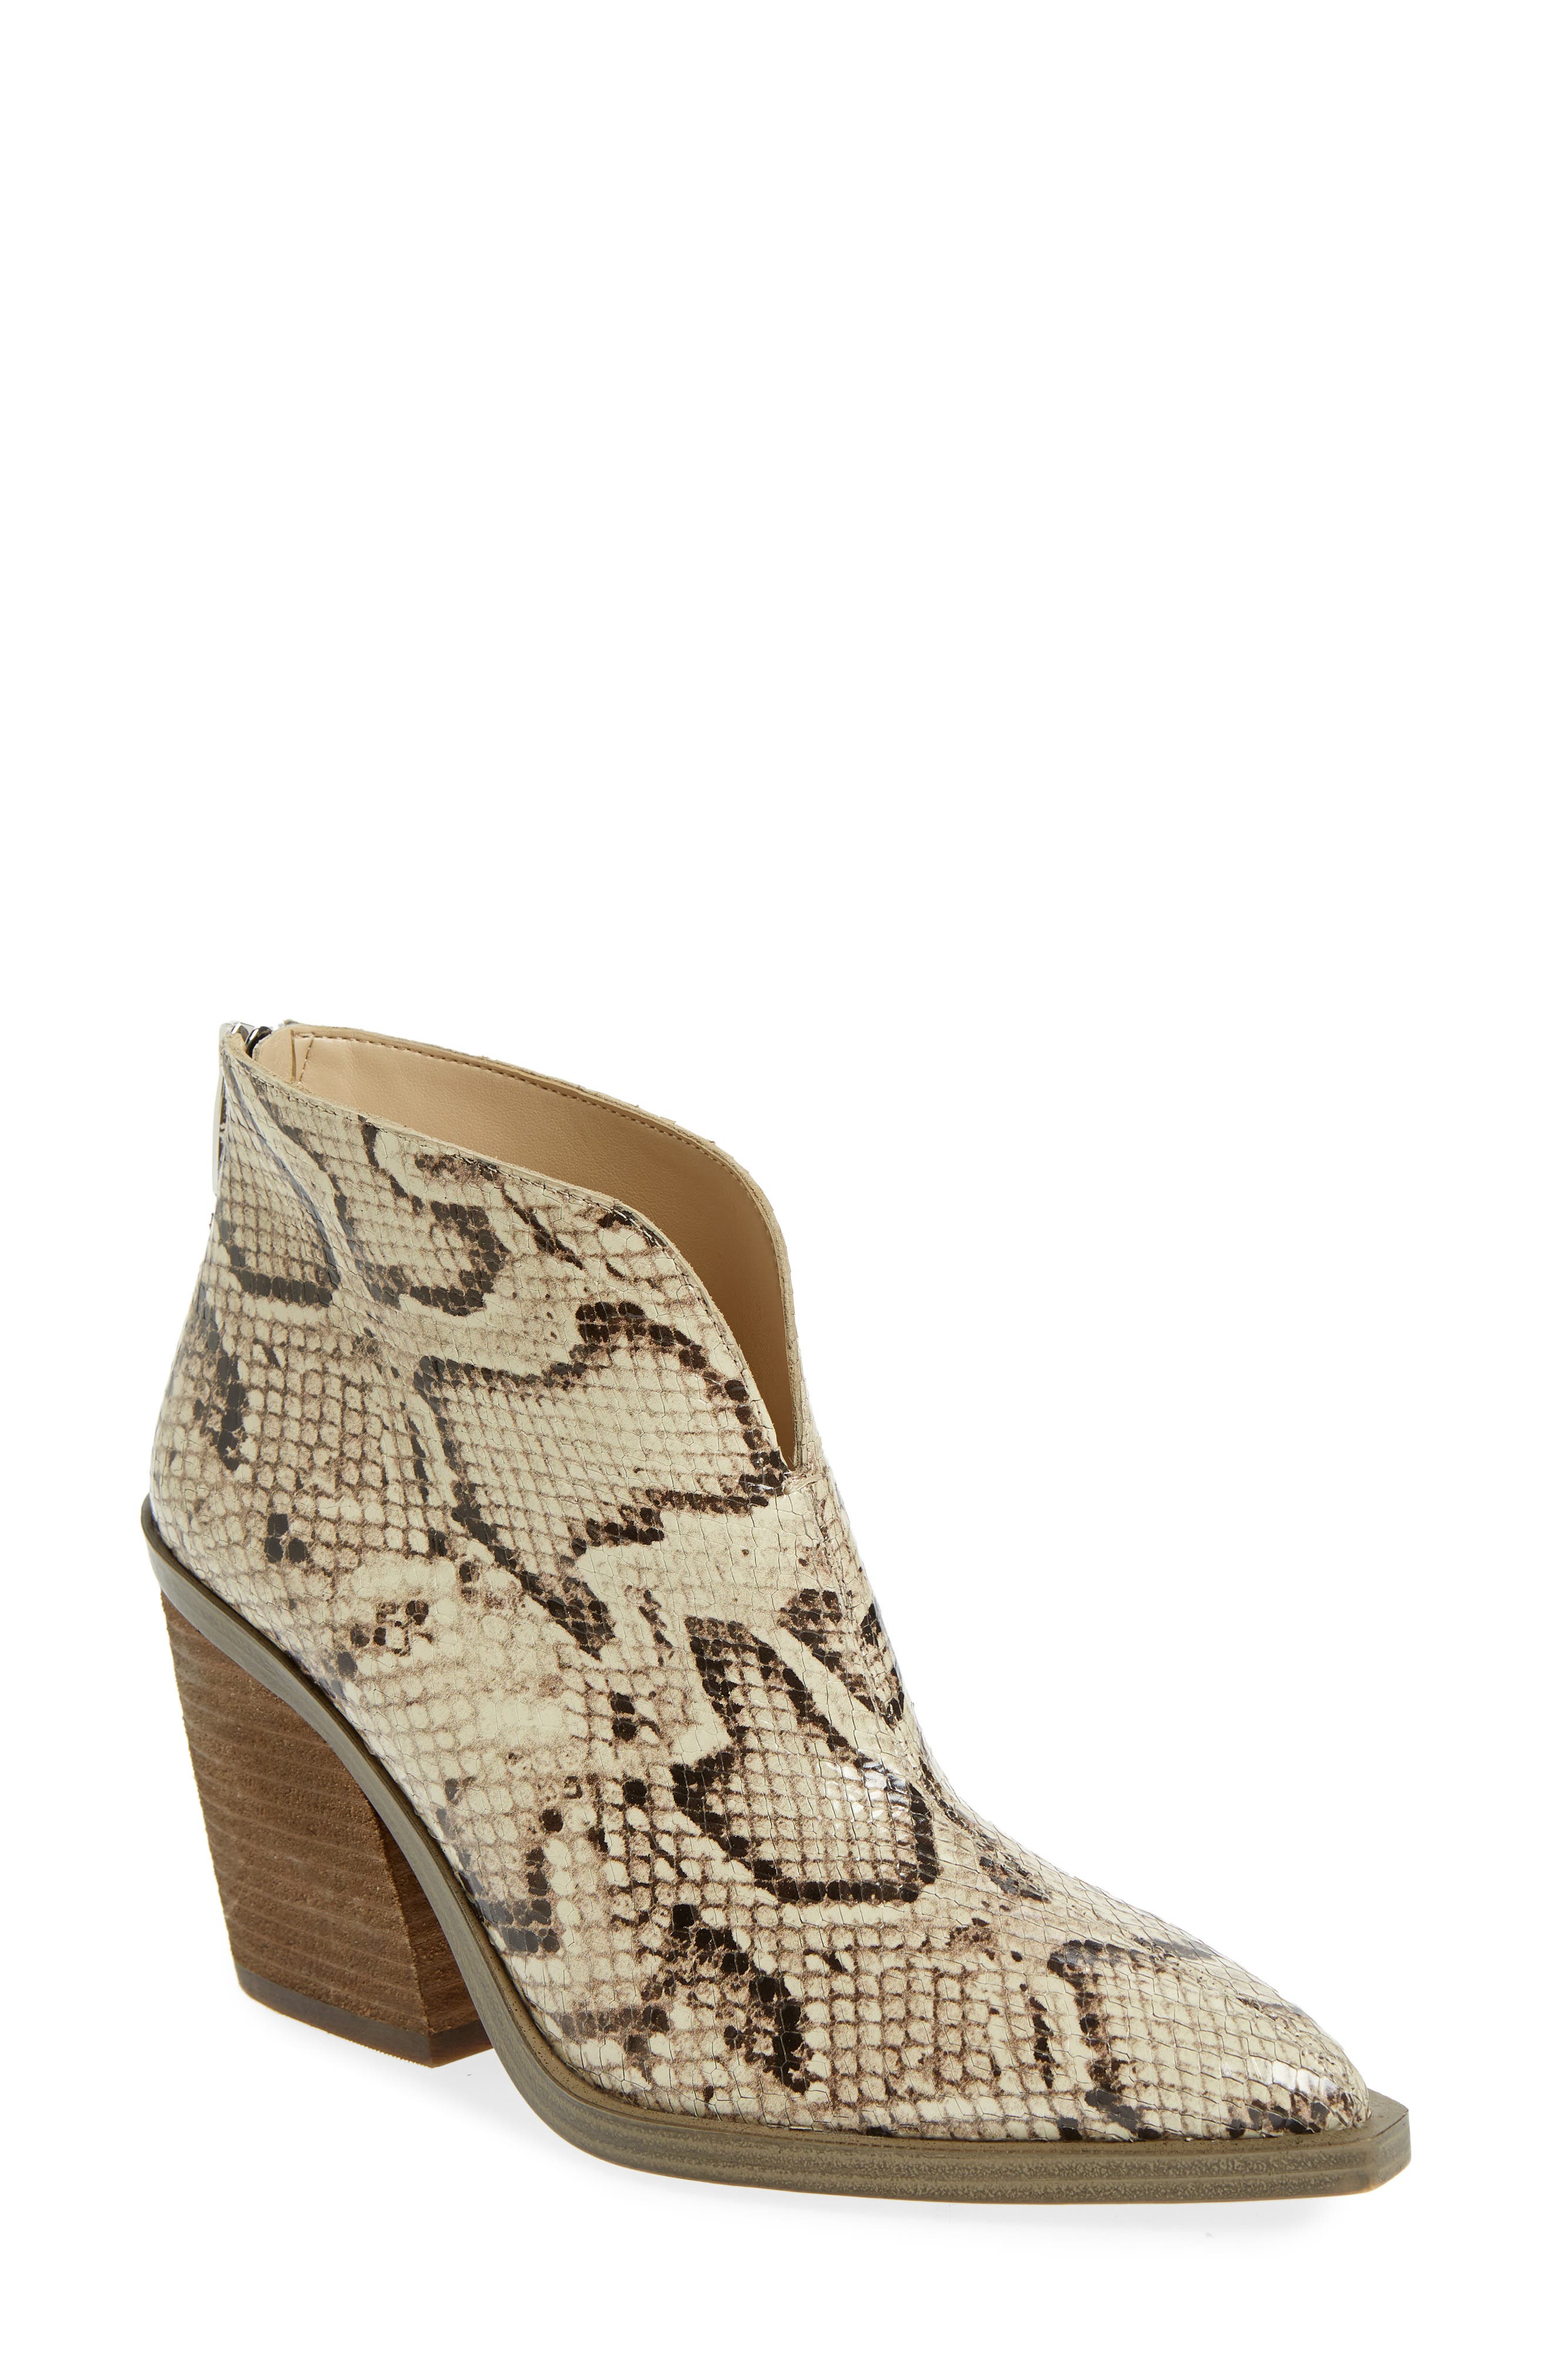 vince camuto snake shoes